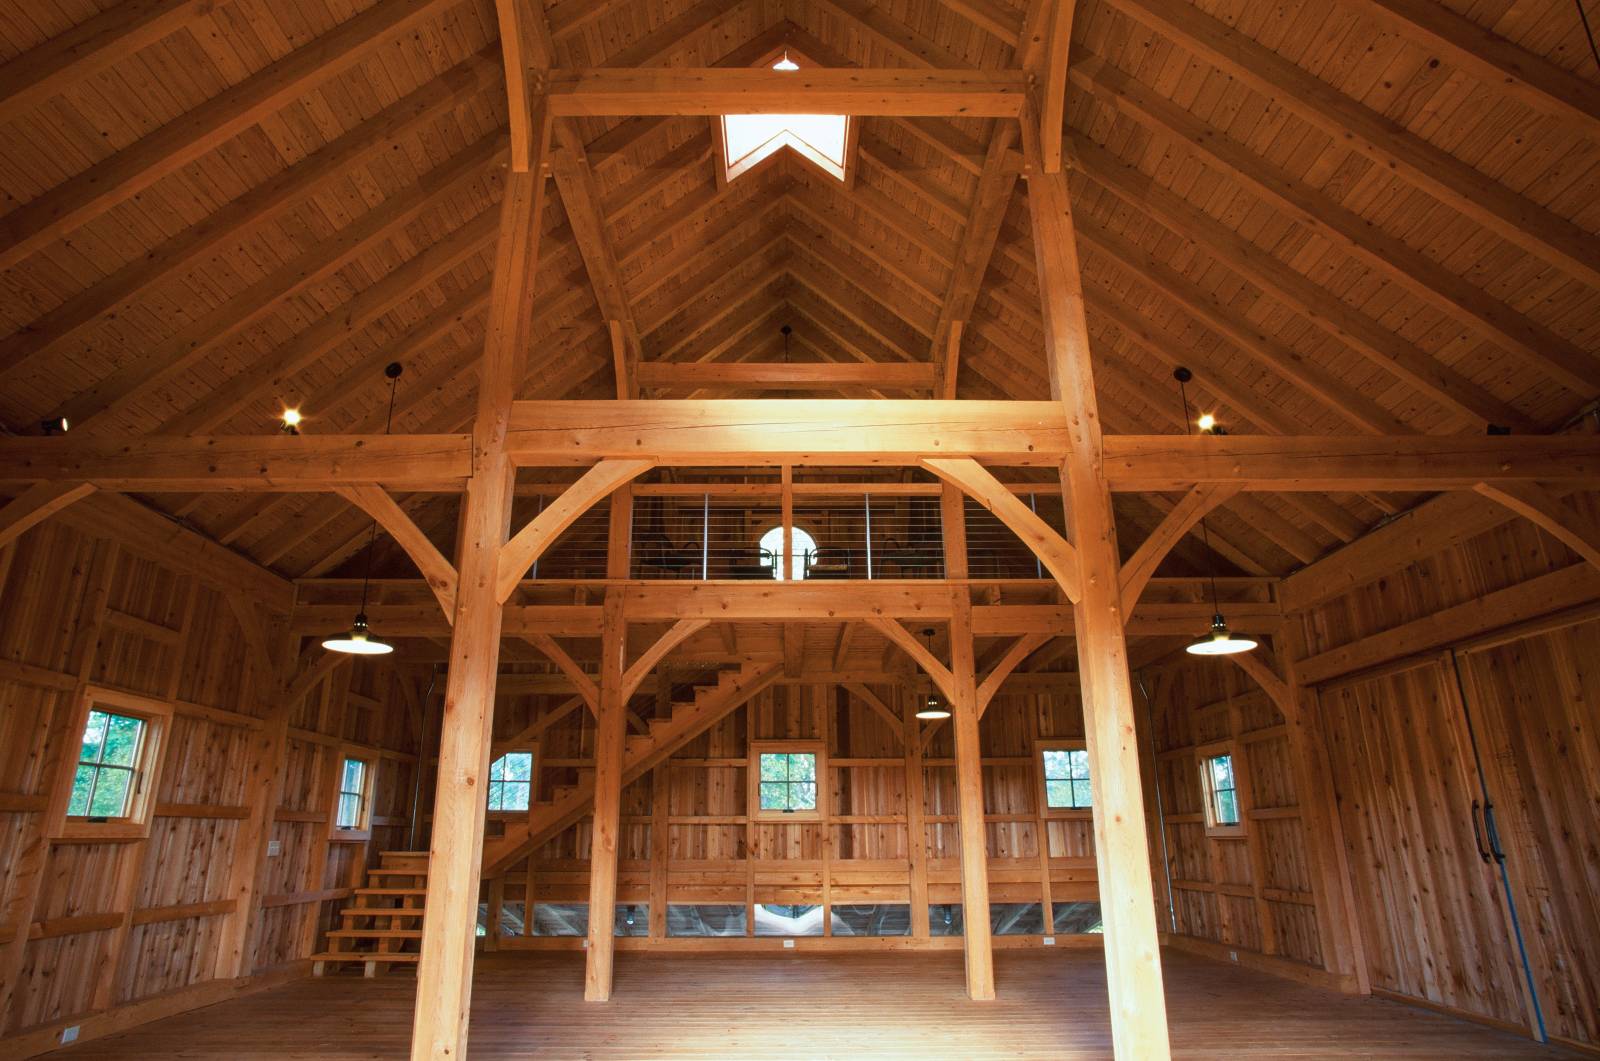 Barn Interior • Floor-to-Ceiling Posts • Center Aisle Design • Traditional Wood Joinery with Oak Pegs